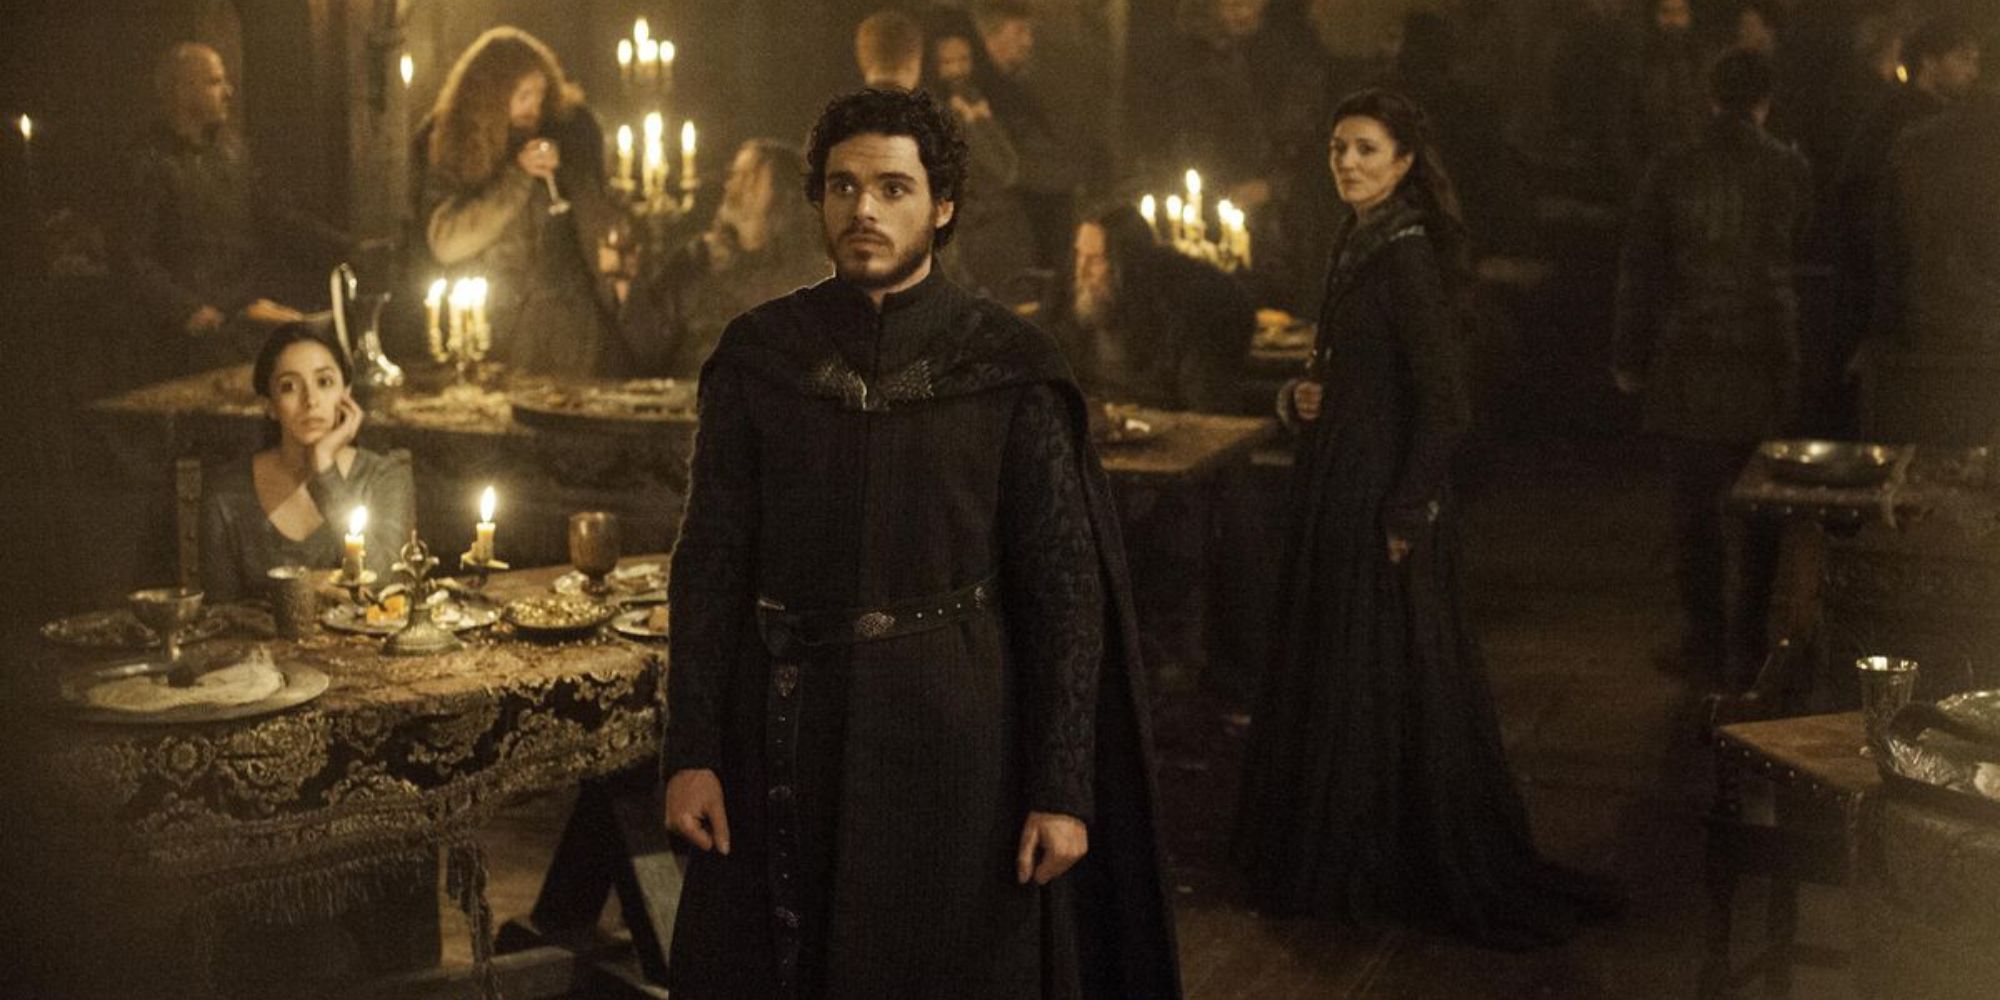 Robb Stark standing still and facing someone off-camera in Game of Thrones.